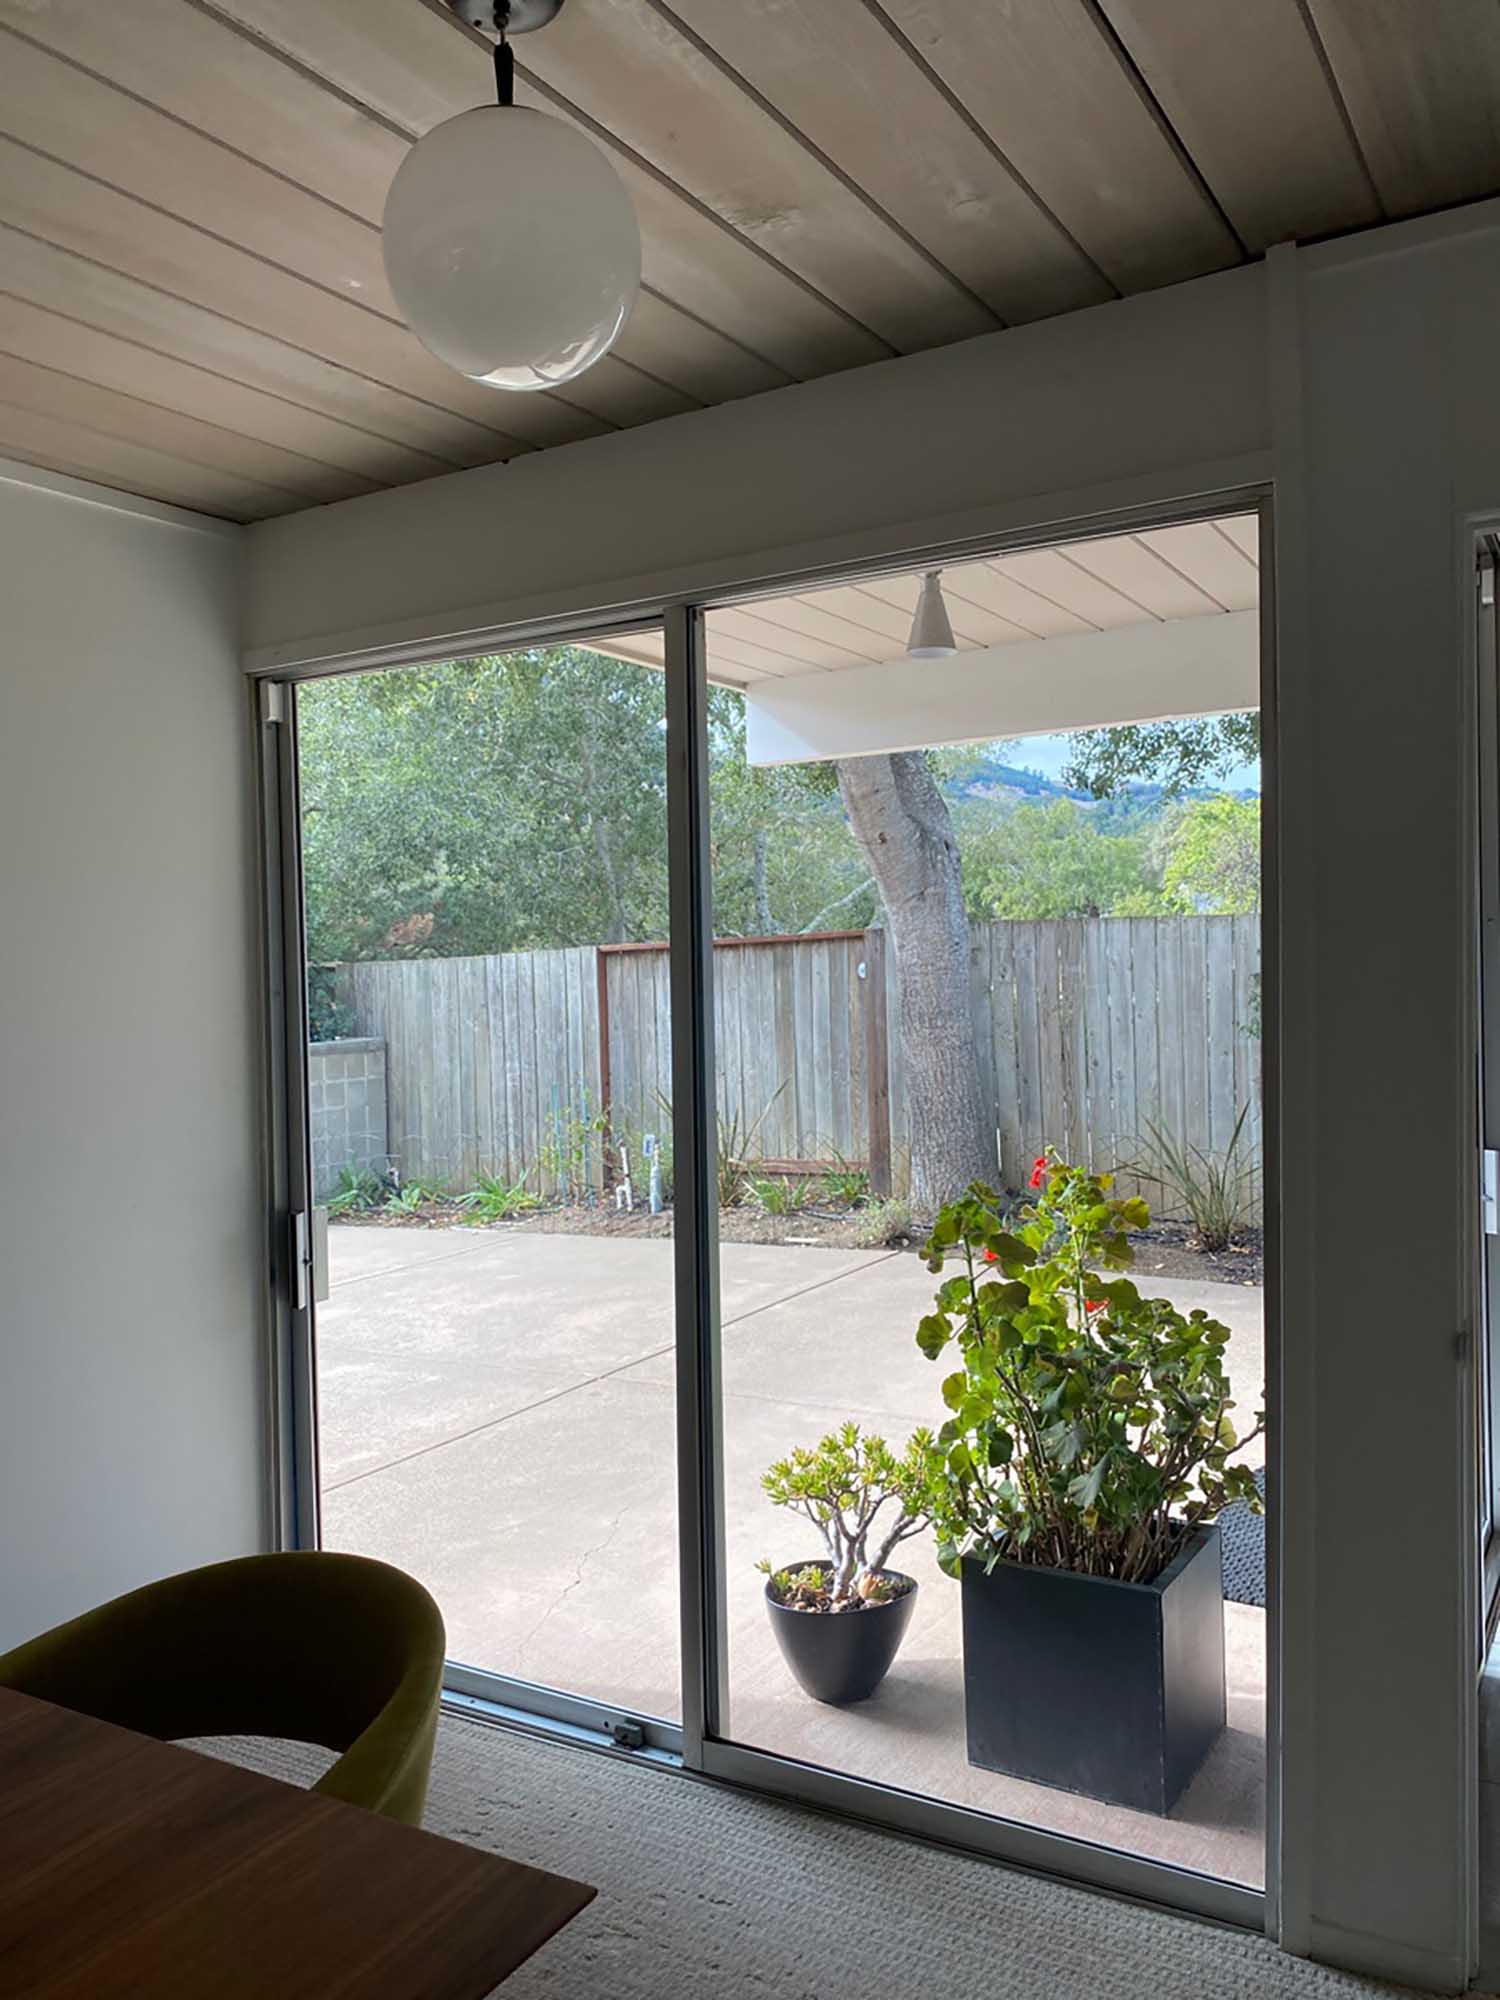 A lovely San Rafael, CA home transformed with 3M Prestige 70 Window Film by ClimatePro.